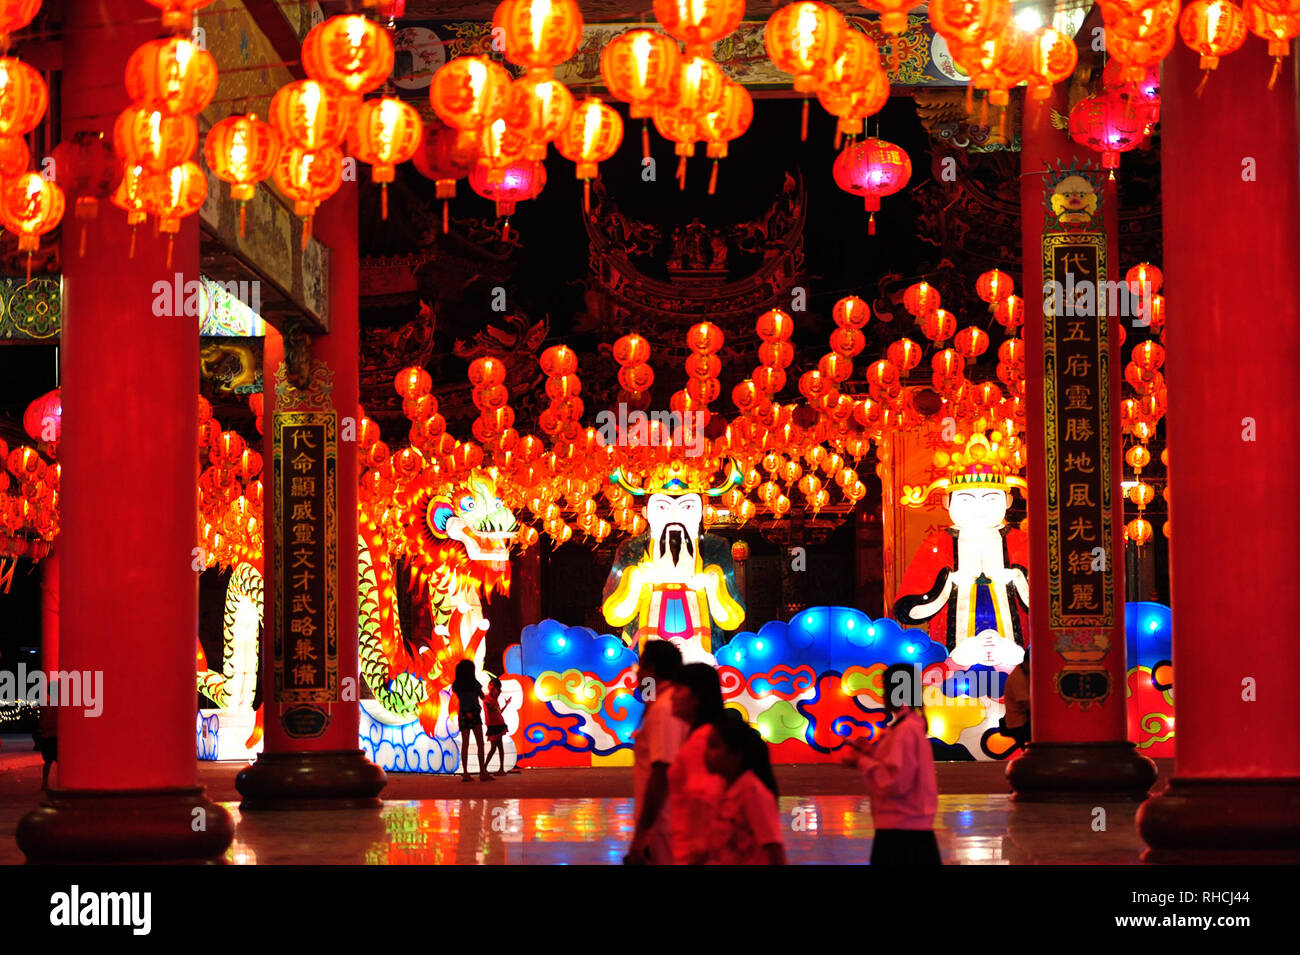 Bangkok, Thailand. 2nd Feb, 2019. People visit a lantern show at a Chinese temple on the outskirts of Bangkok, Thailand, on Feb. 2, 2019. The lantern show is held here to celebrate the upcoming Chinese Lunar New Year, which will fall on Feb. 5. Credit: Rachen Sageamsak/Xinhua/Alamy Live News Stock Photo